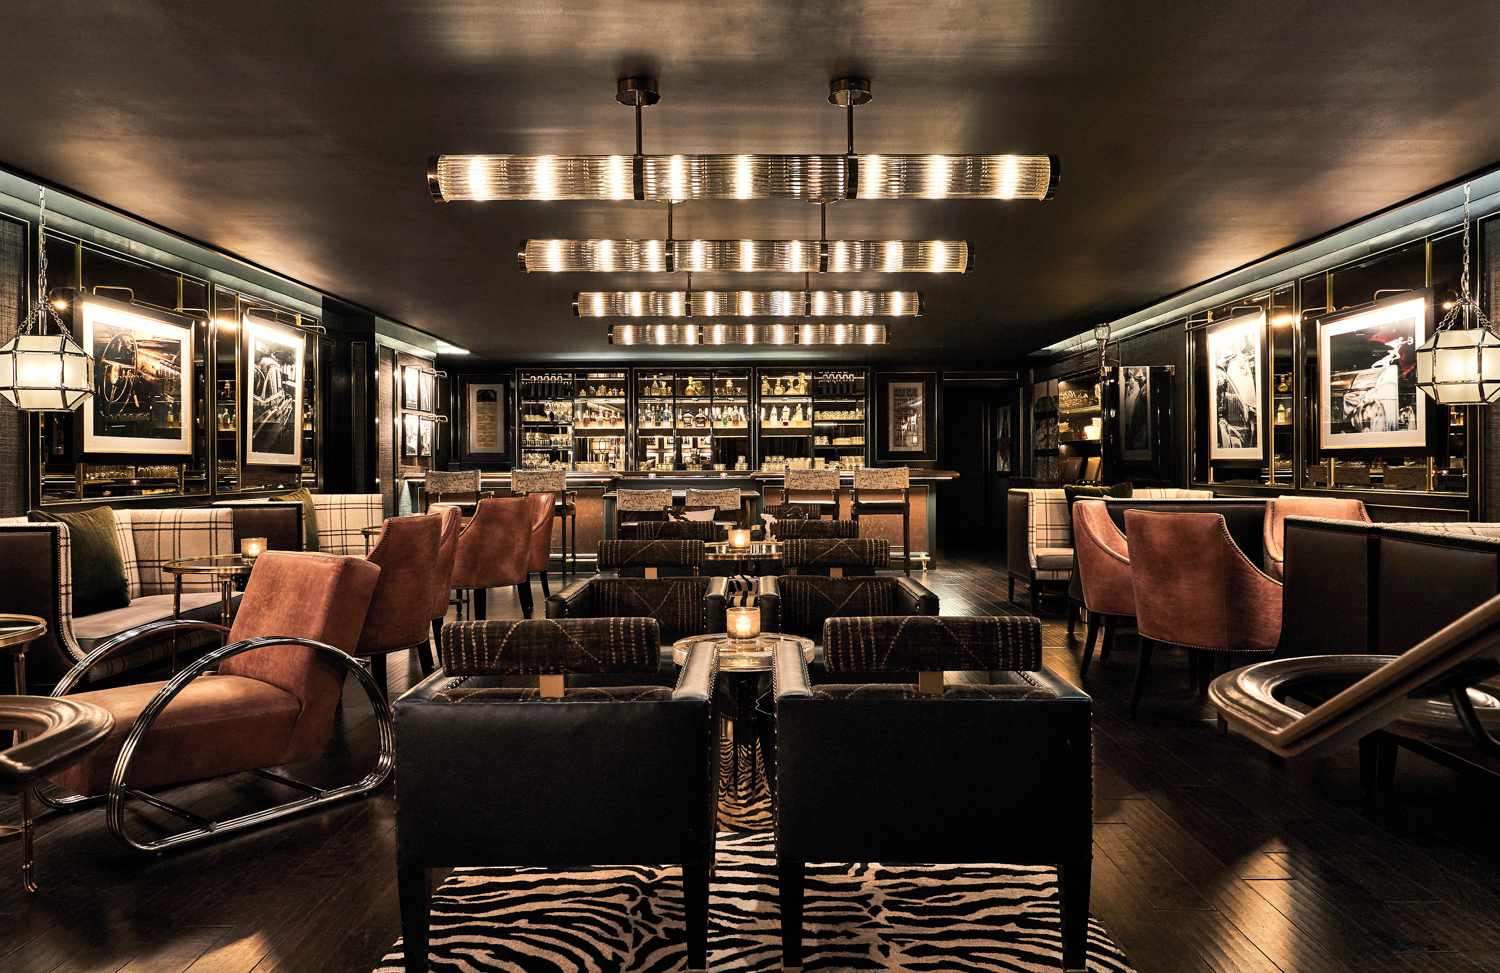 Cocktail lounge with dark seats, zebra-patterned rug and geometric lighting on a dark-painted ceiling